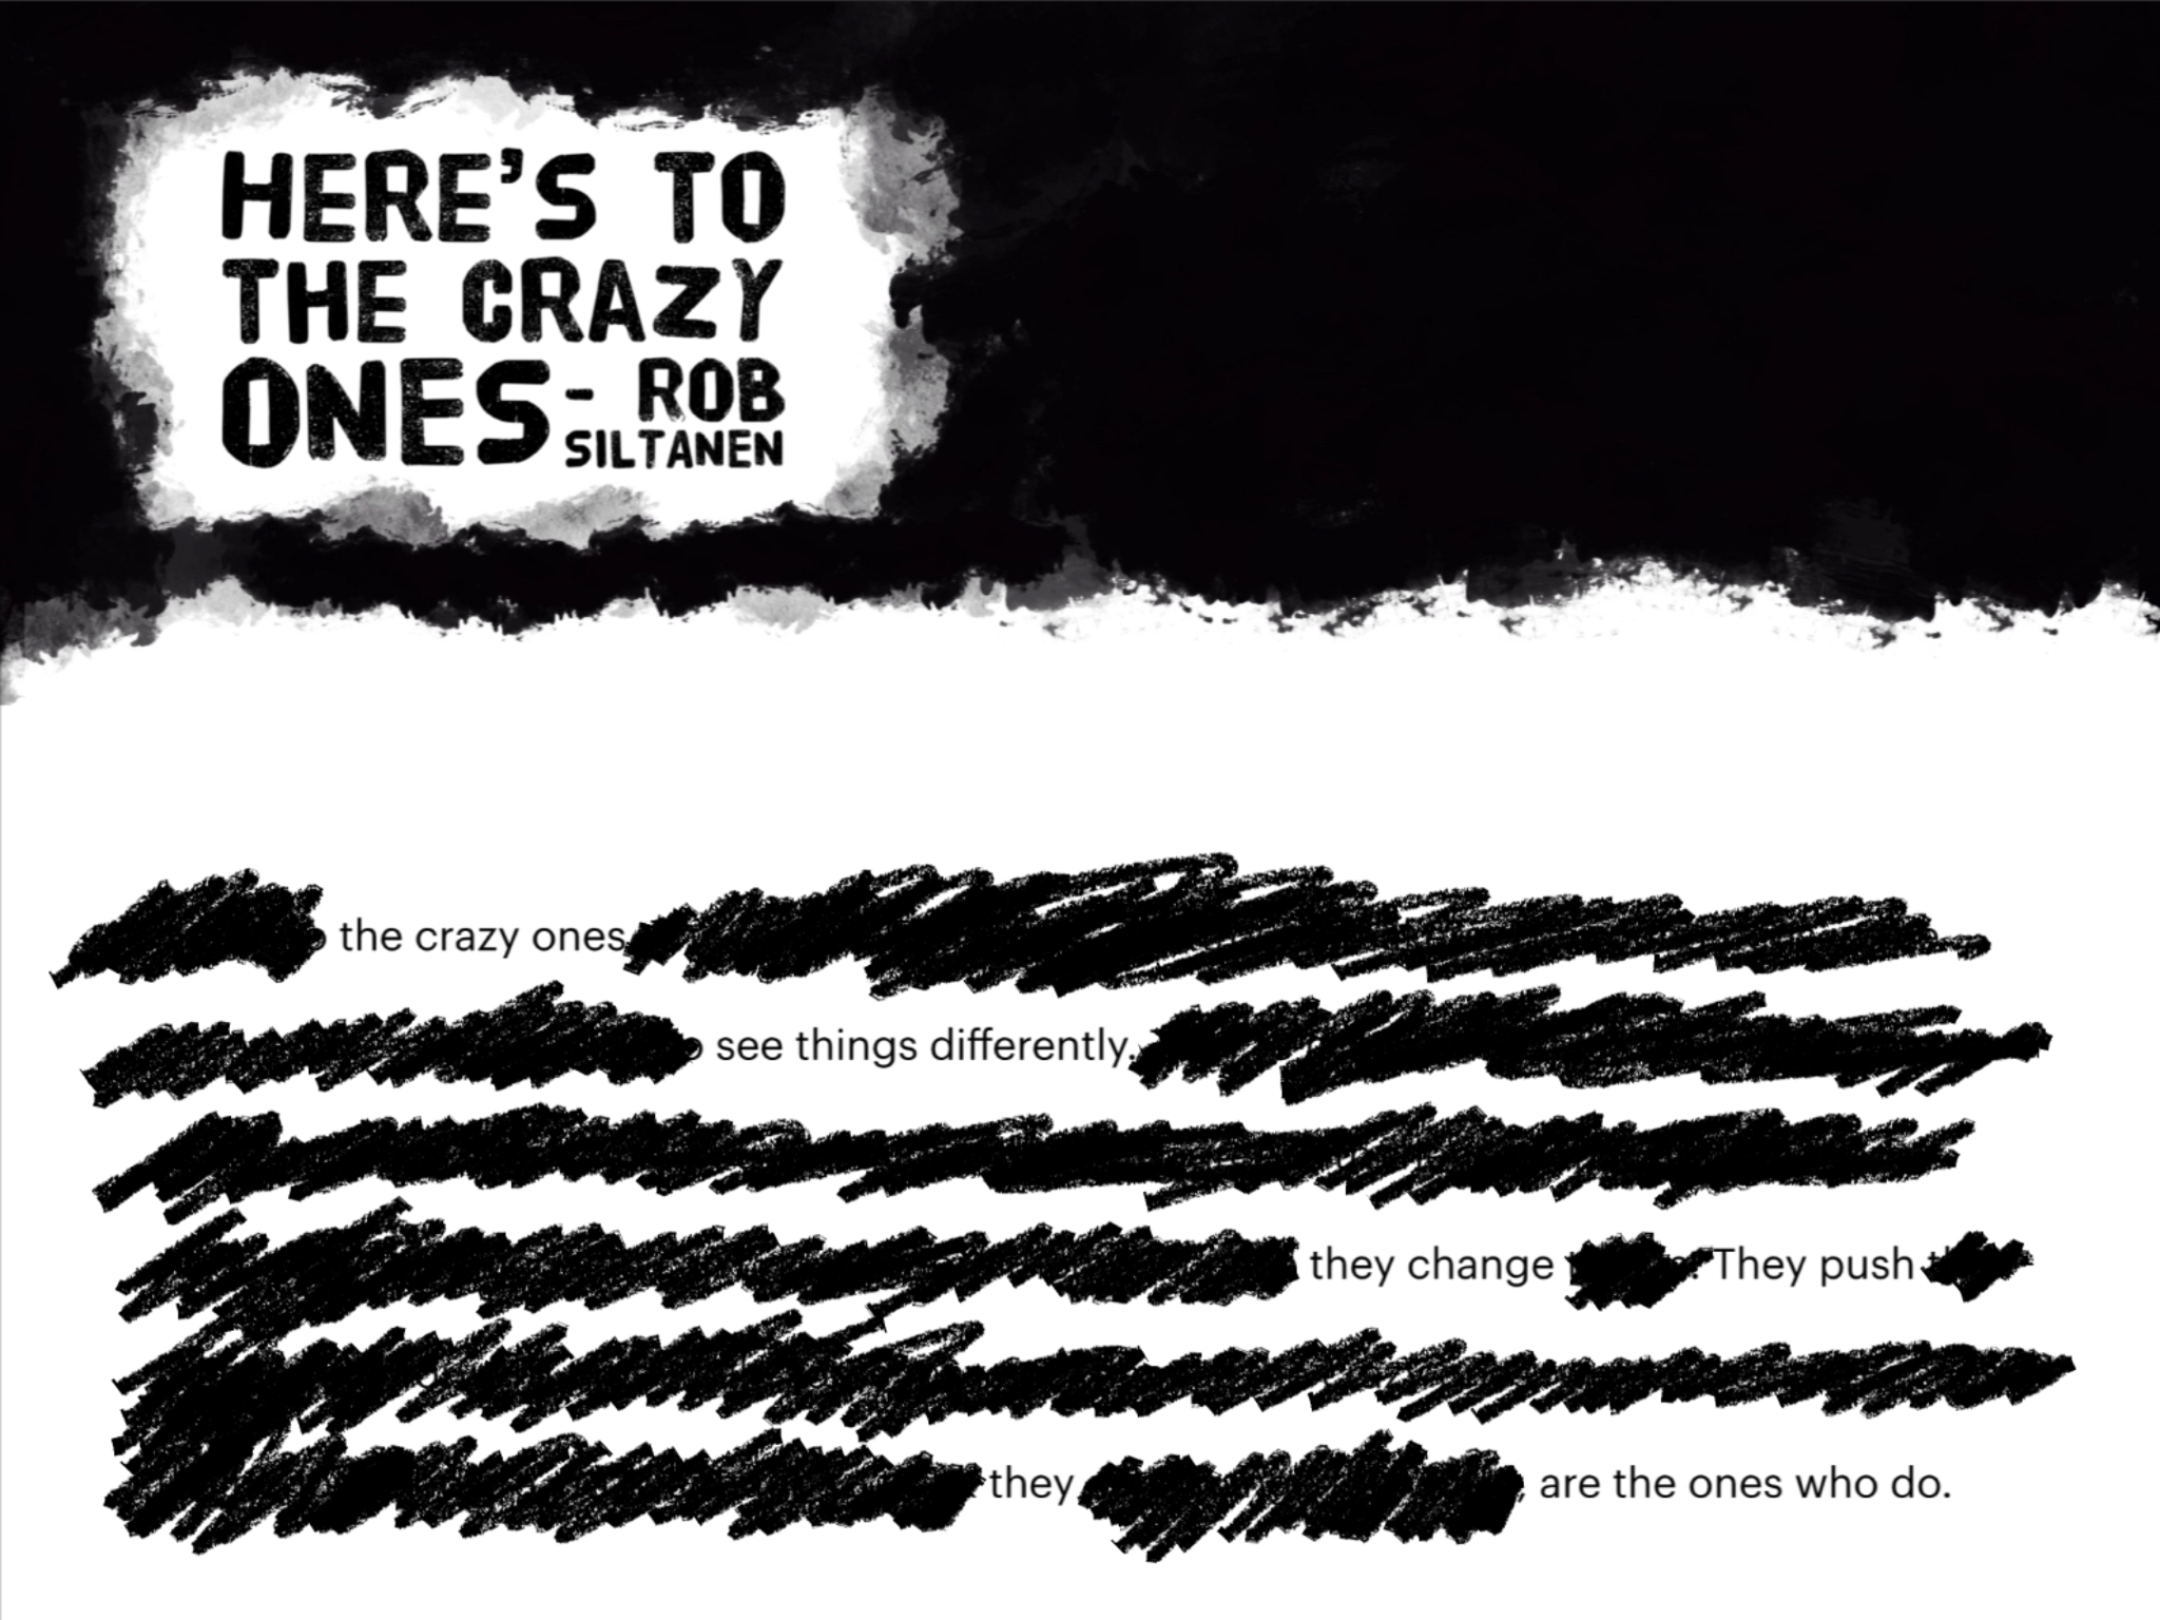 Blackout Poetry: “The crazy ones. See things differently. They change. They push. They are the ones who do.”